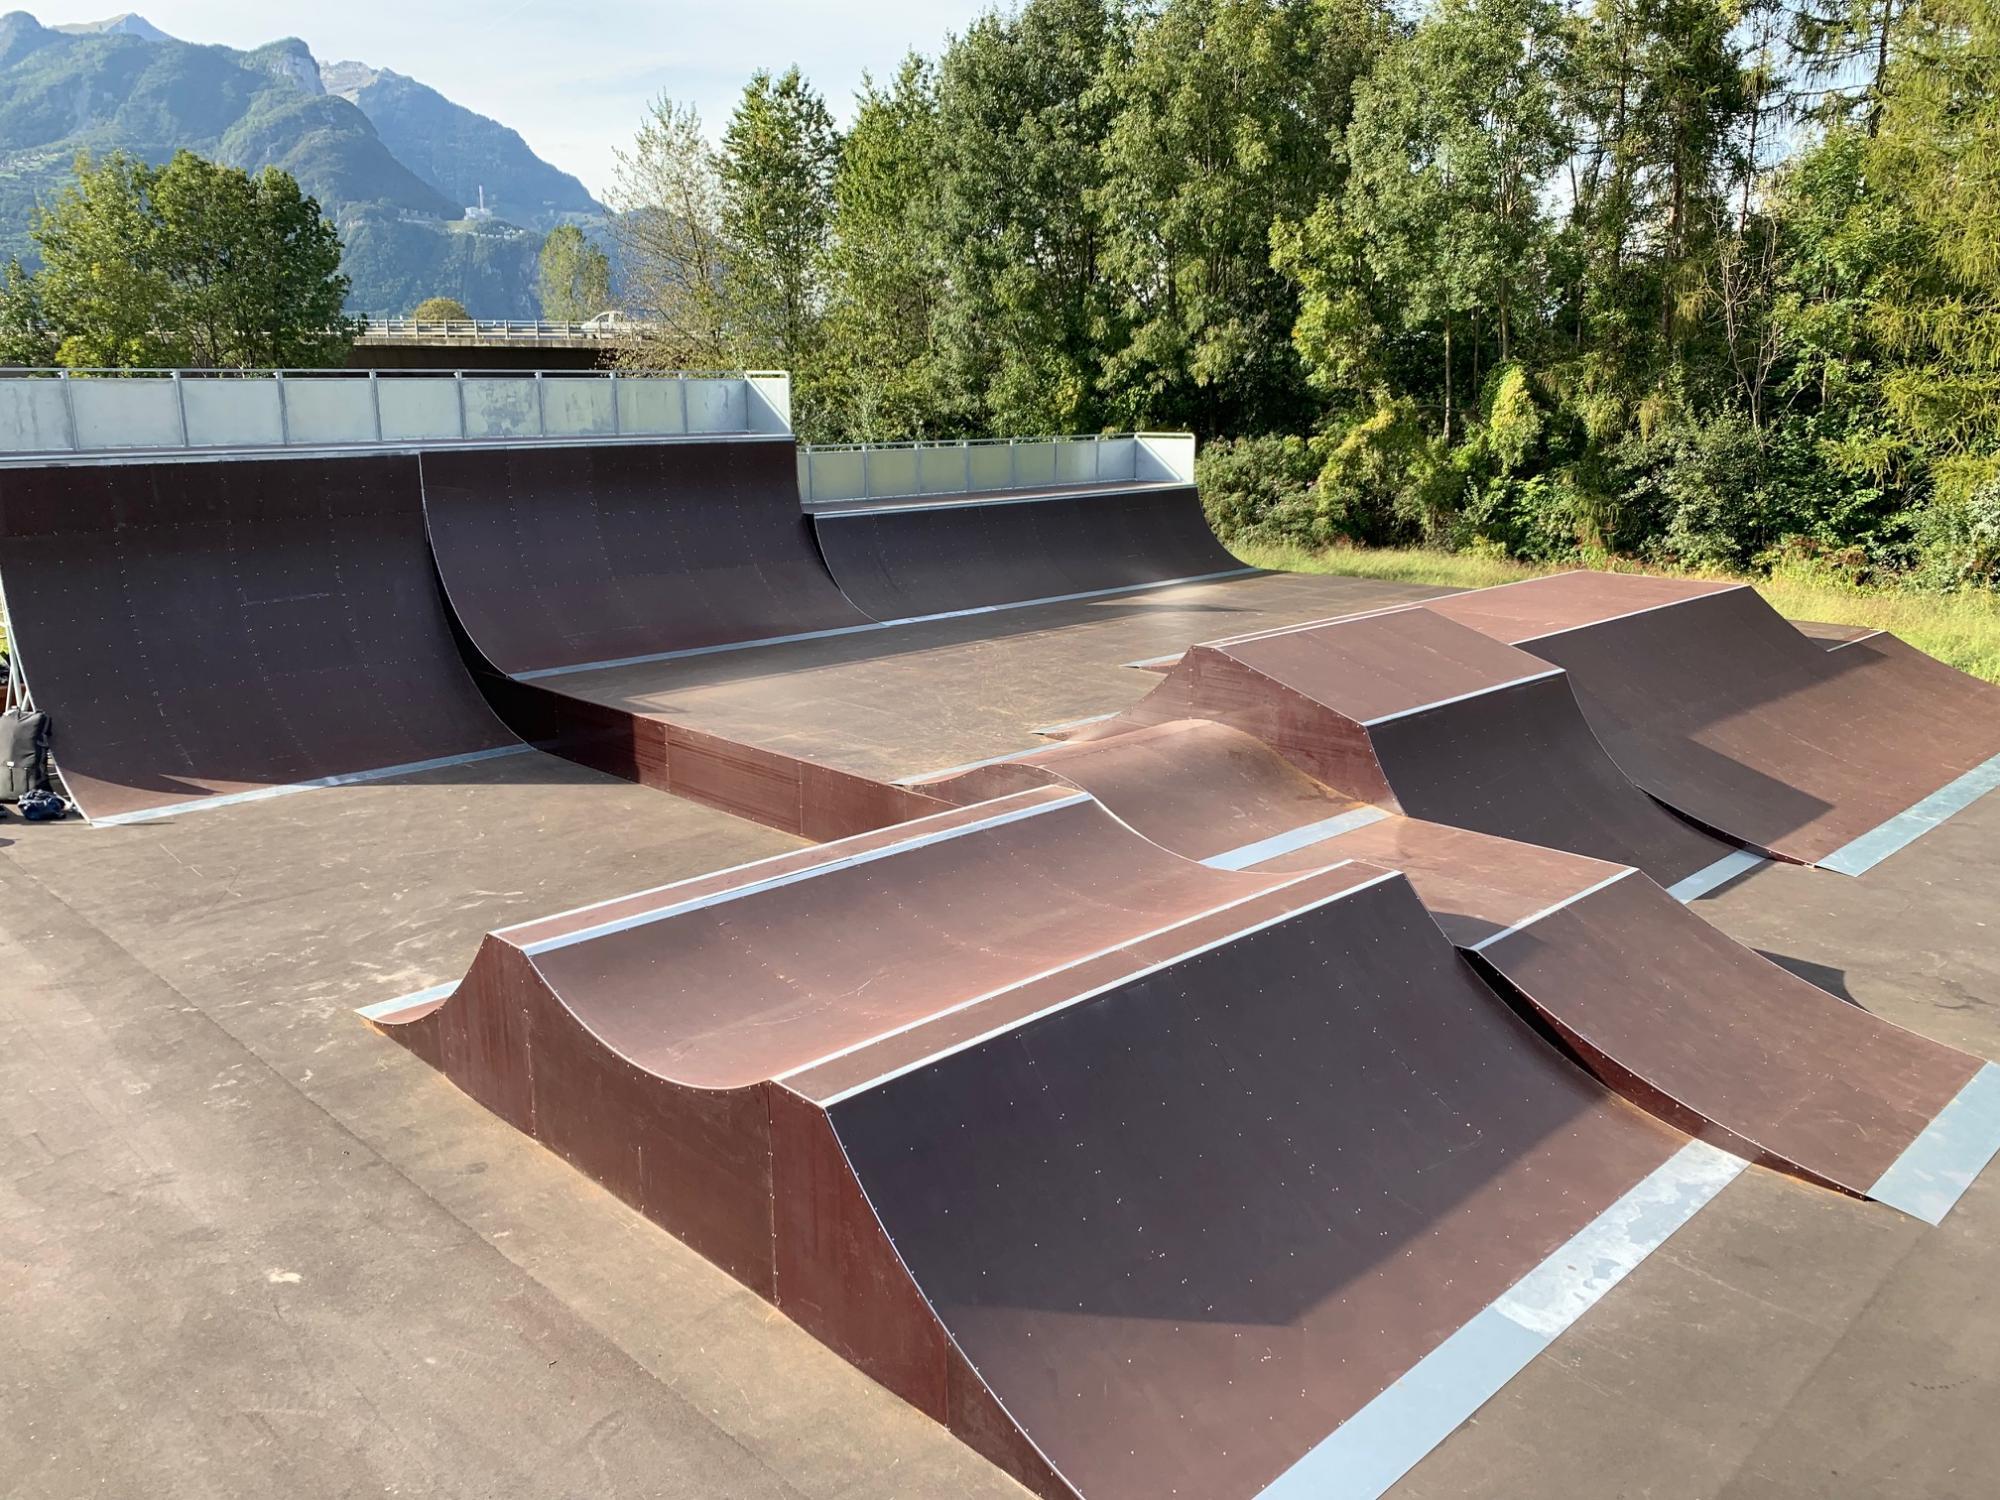 Skatepark of the World Cycling Centre - summer - Aigle